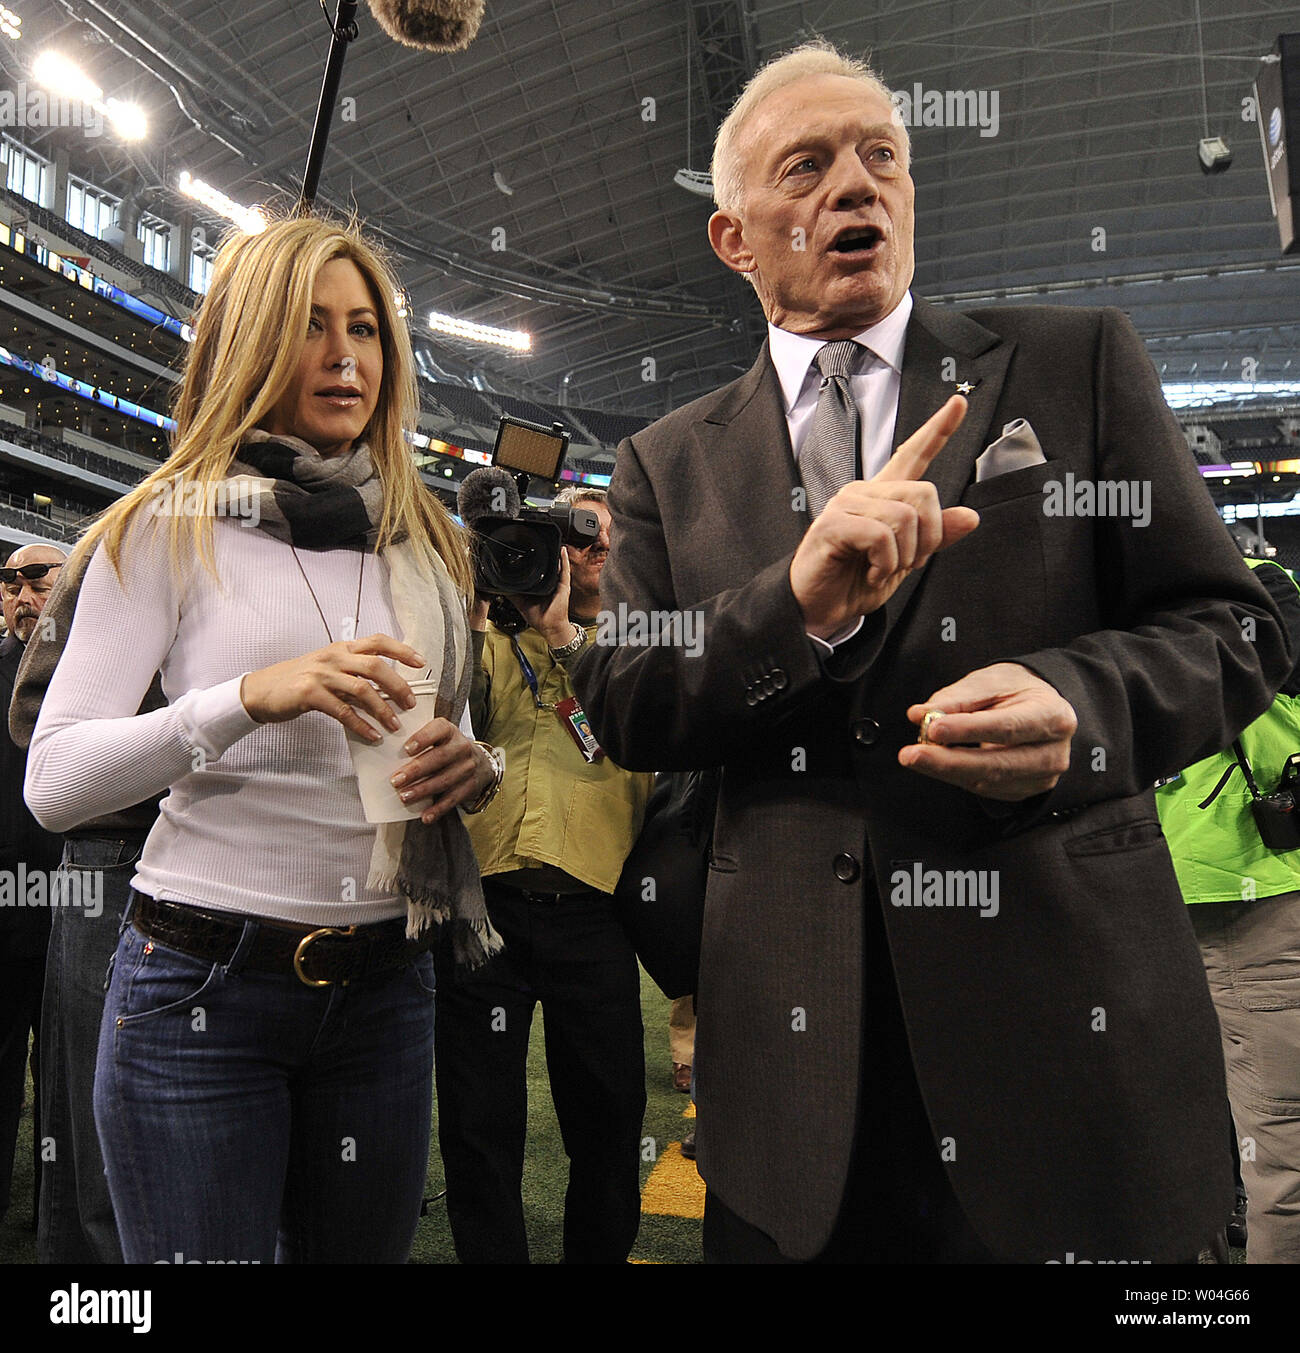 Actress Jennifer Aniston and Dallas Cowboys owner Jerry Jones talk during Super Bowl XLV pre-game activities at Cowboys Stadium in Arlington, Texas  on February 6, 2011.     UPI/Brian Kersey Stock Photo